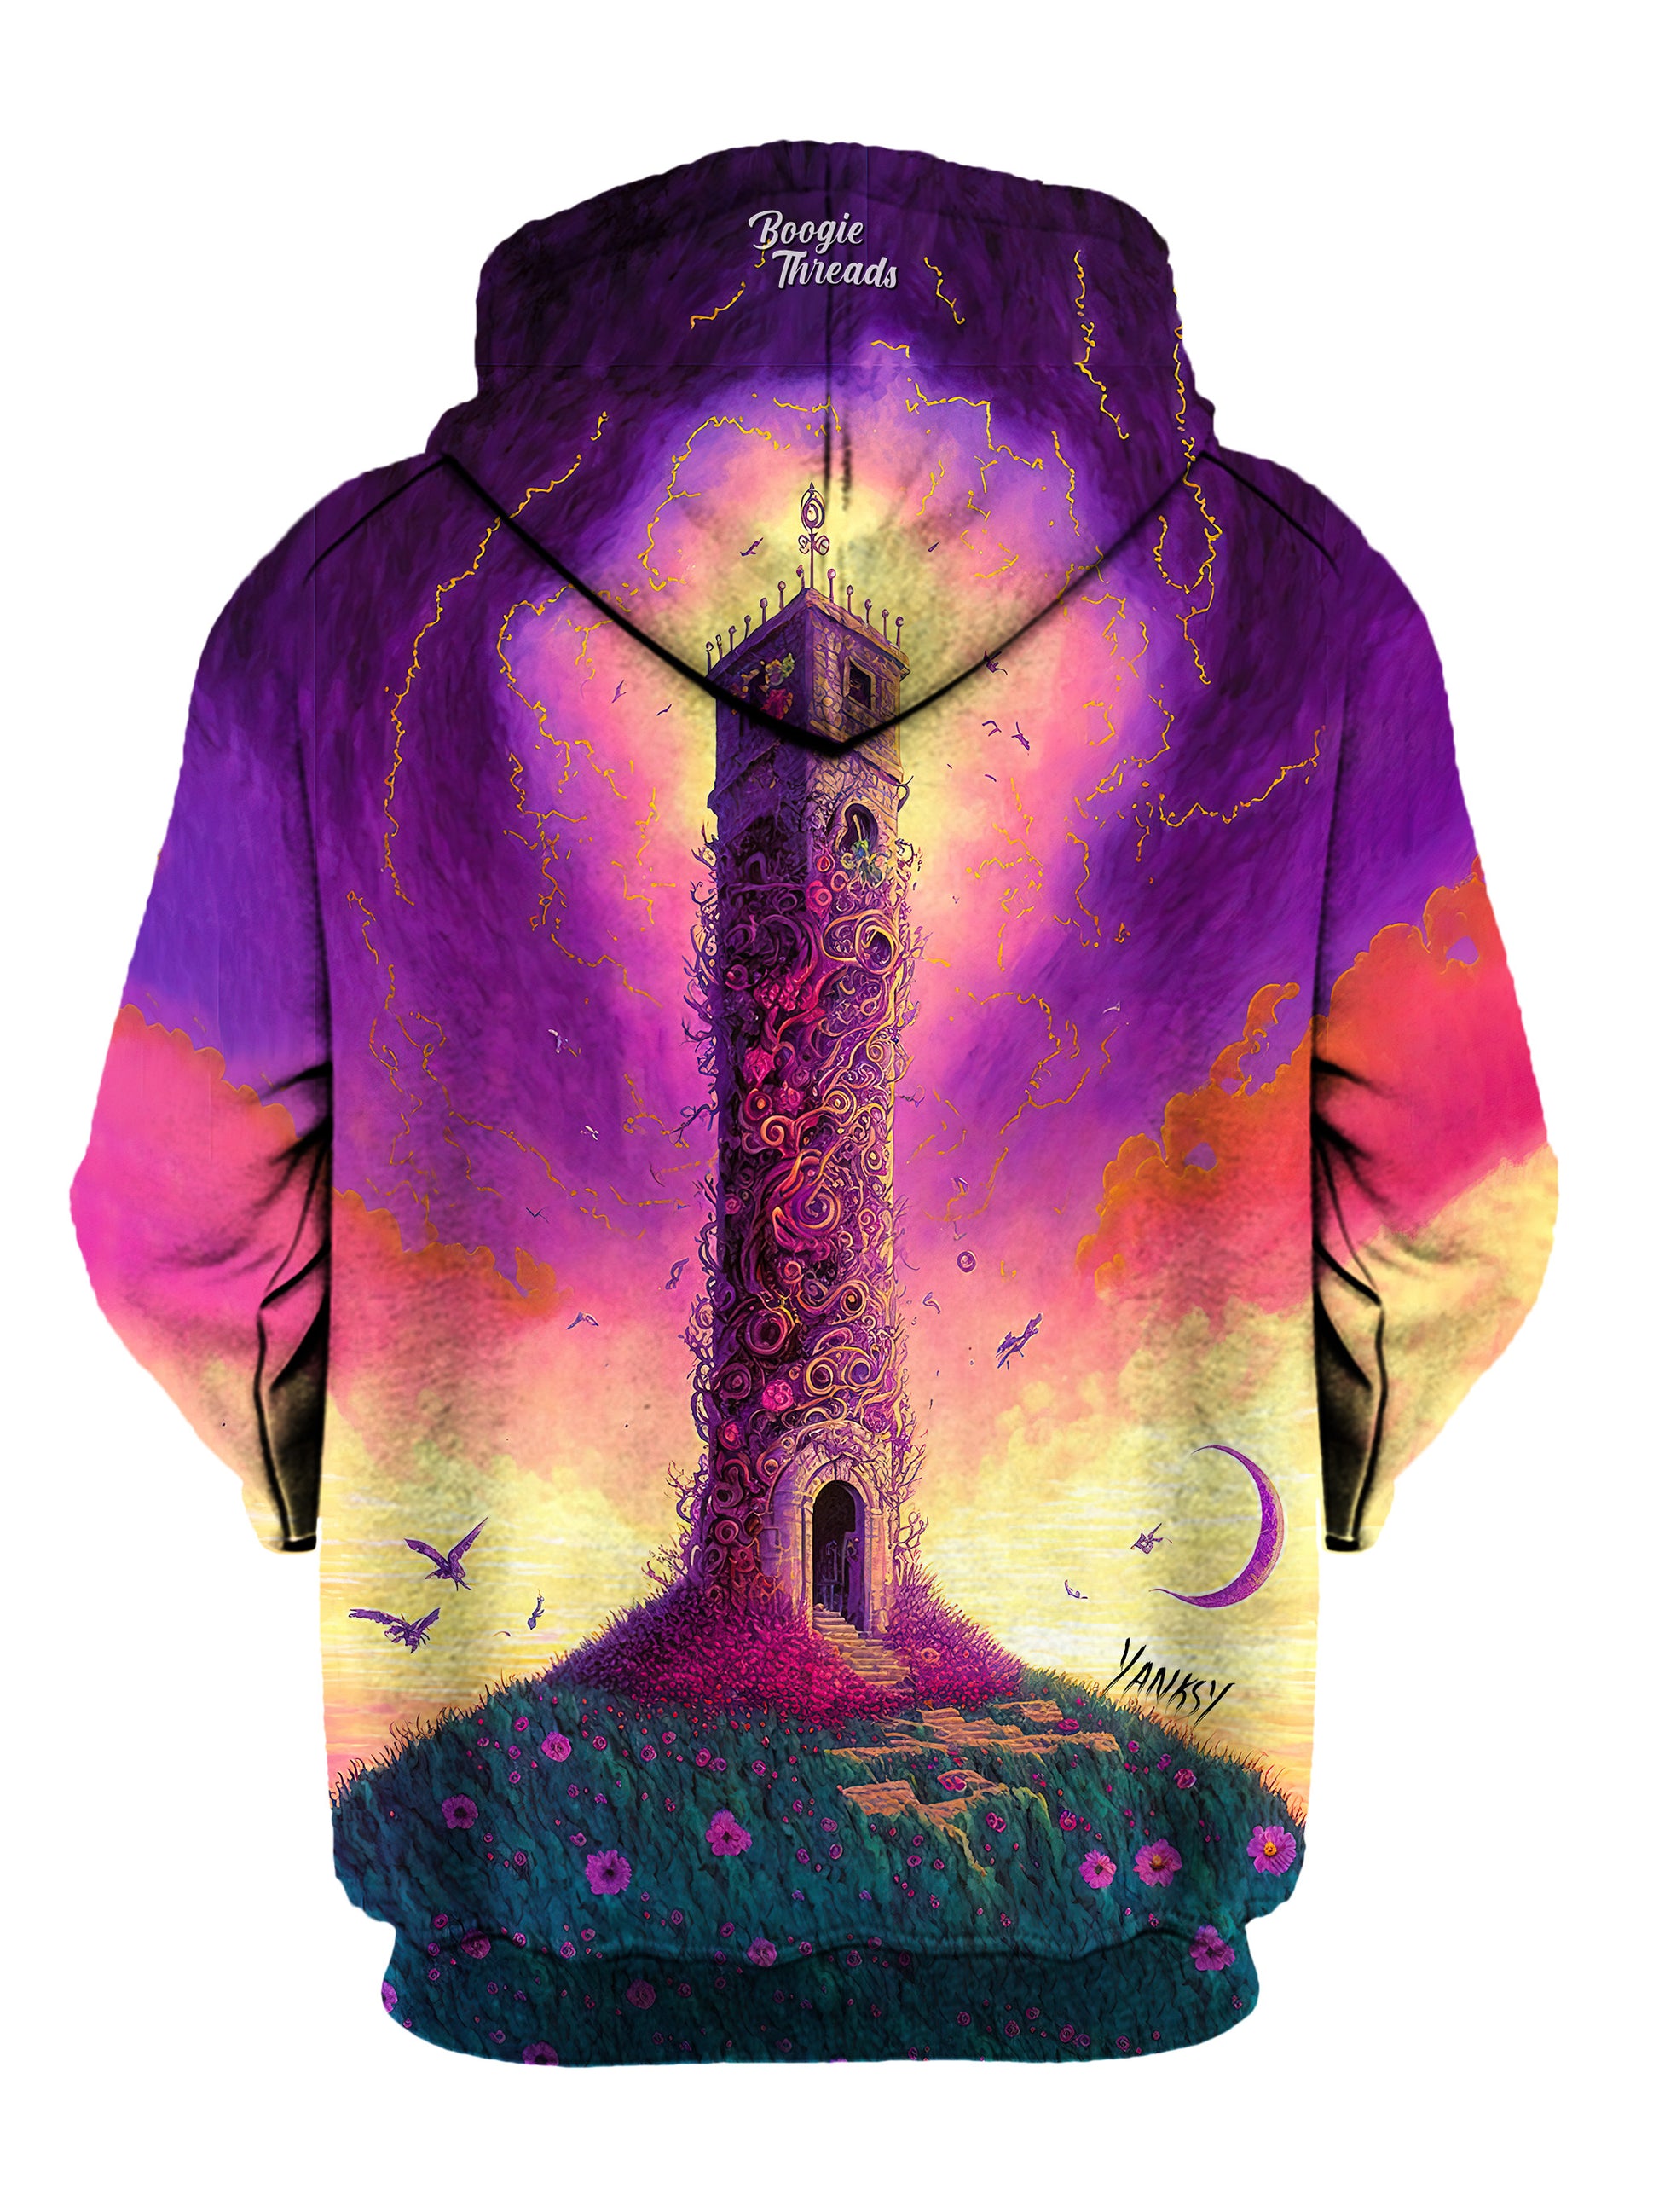 Elevate your wardrobe with this bold and colorful trippy hoodie